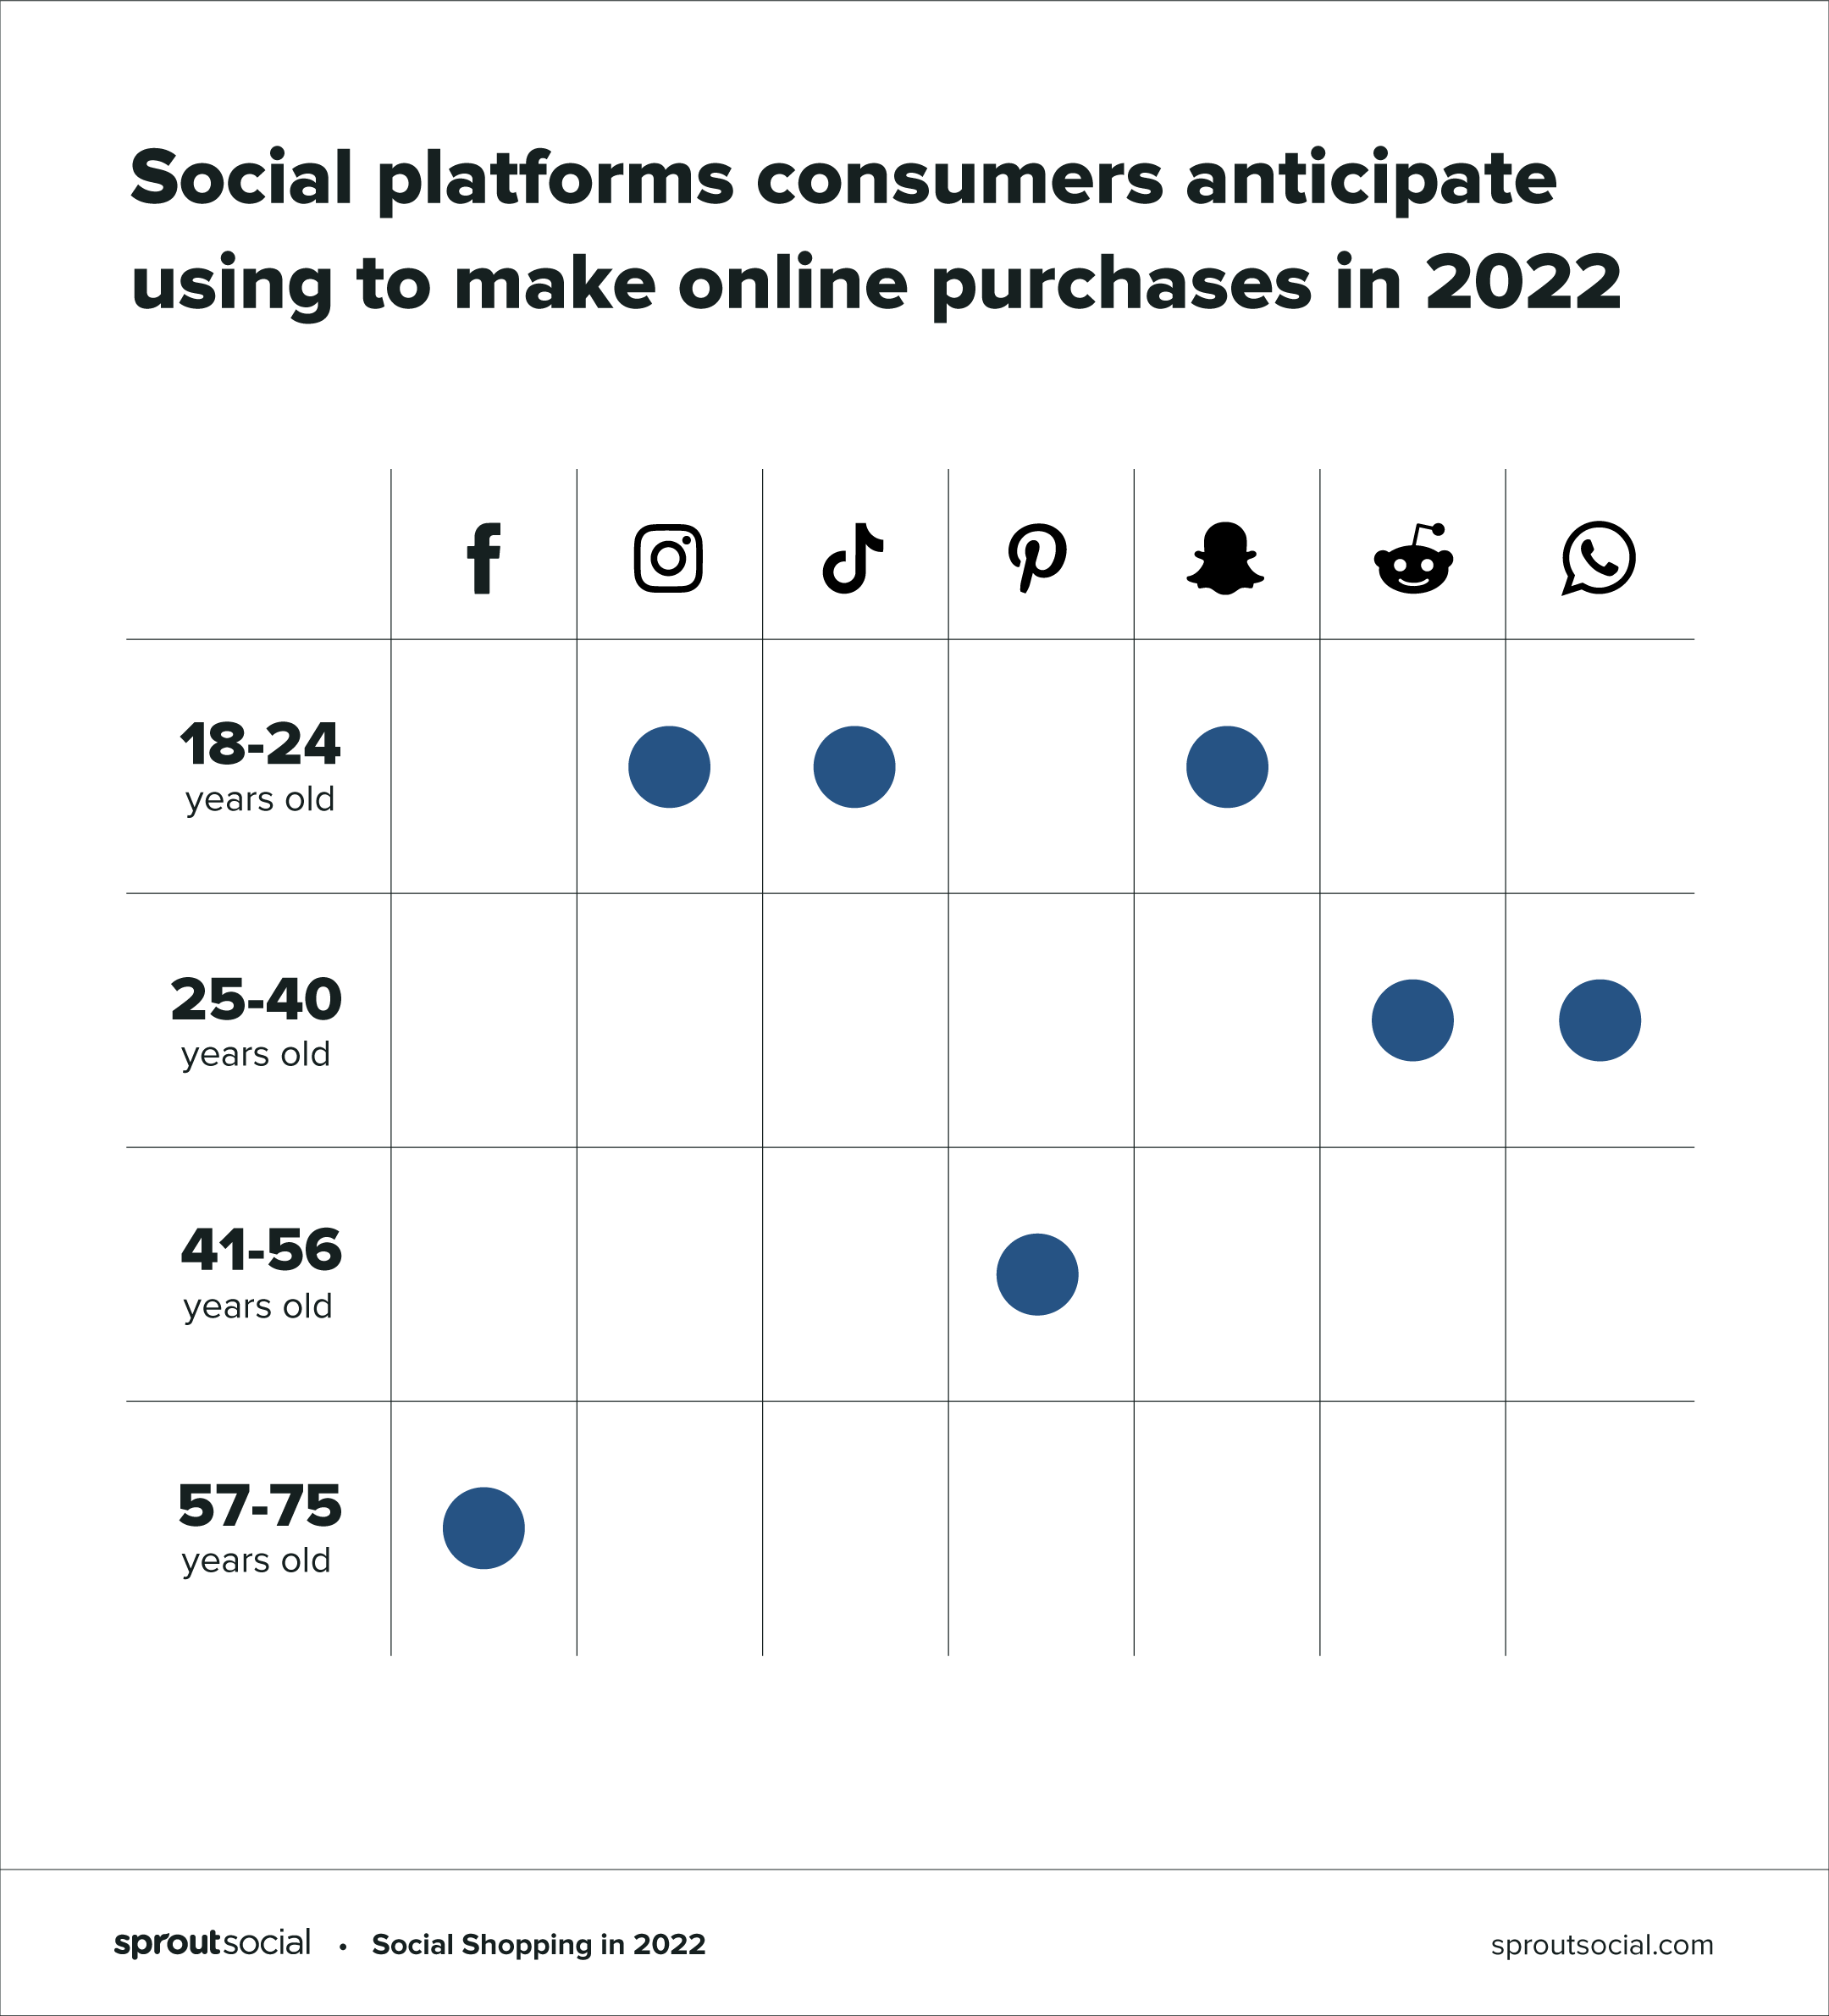 Table showing which social platforms consumers anticipate using to purchase 2022